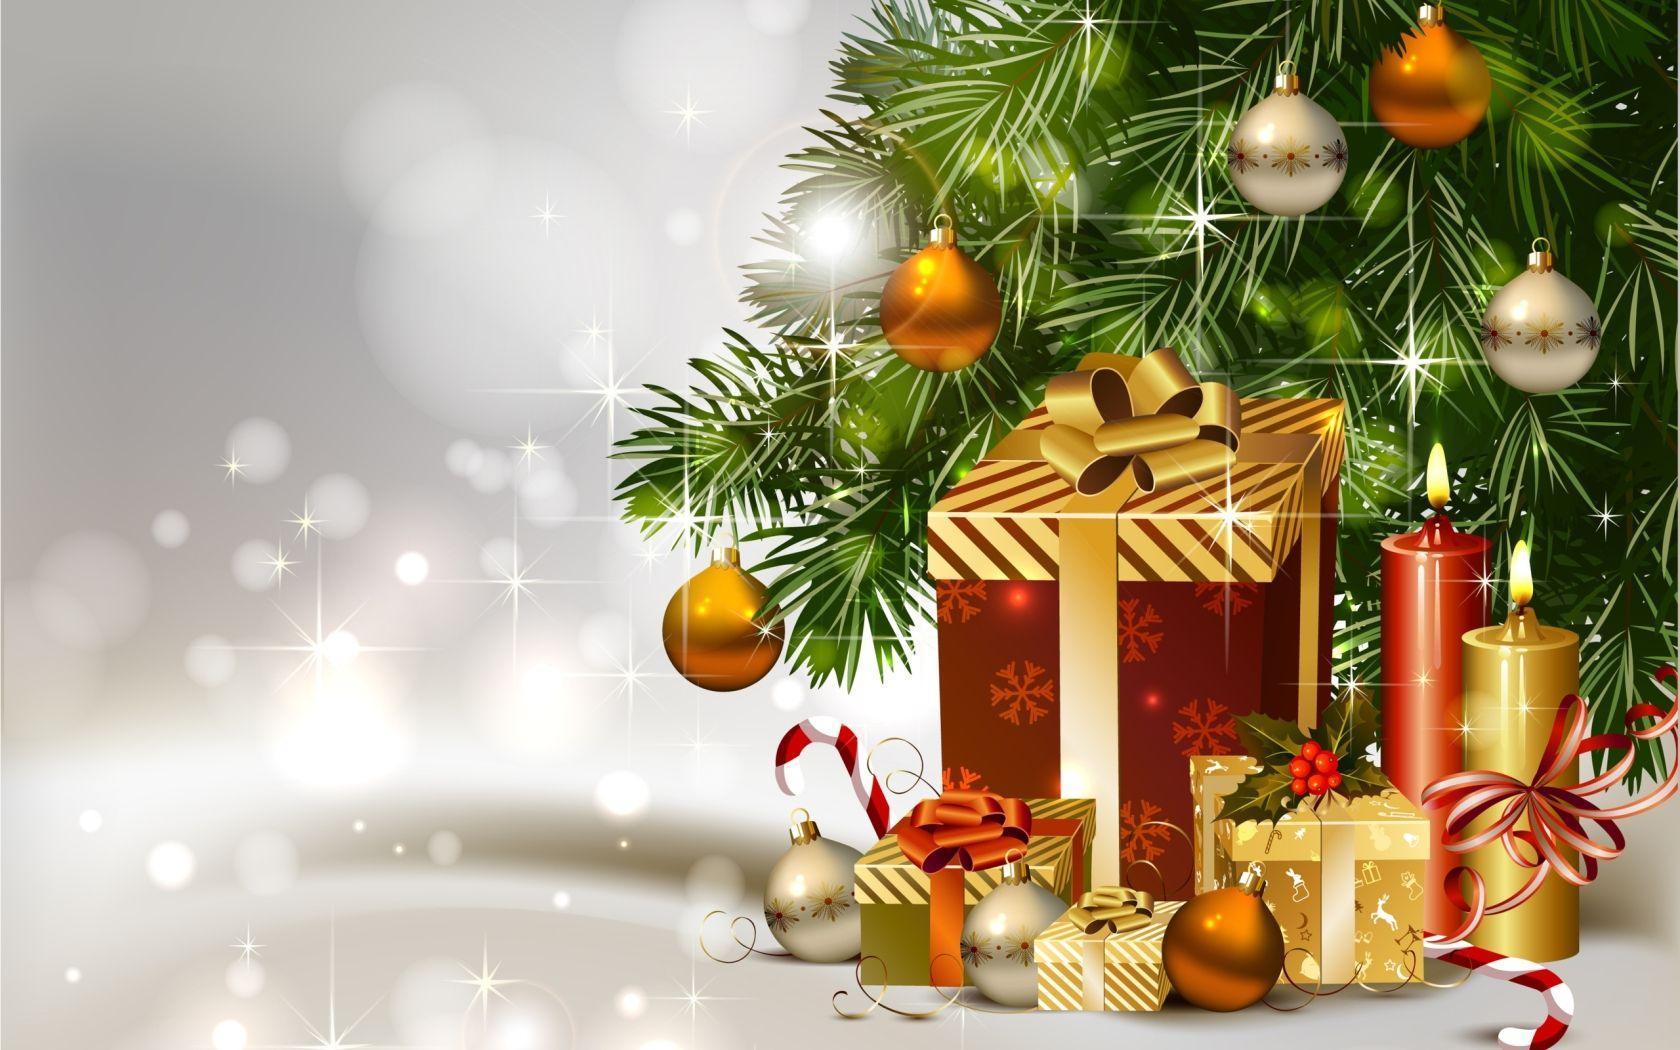 Christmas Gifts under the Tree widescreen wallpaper. Wide